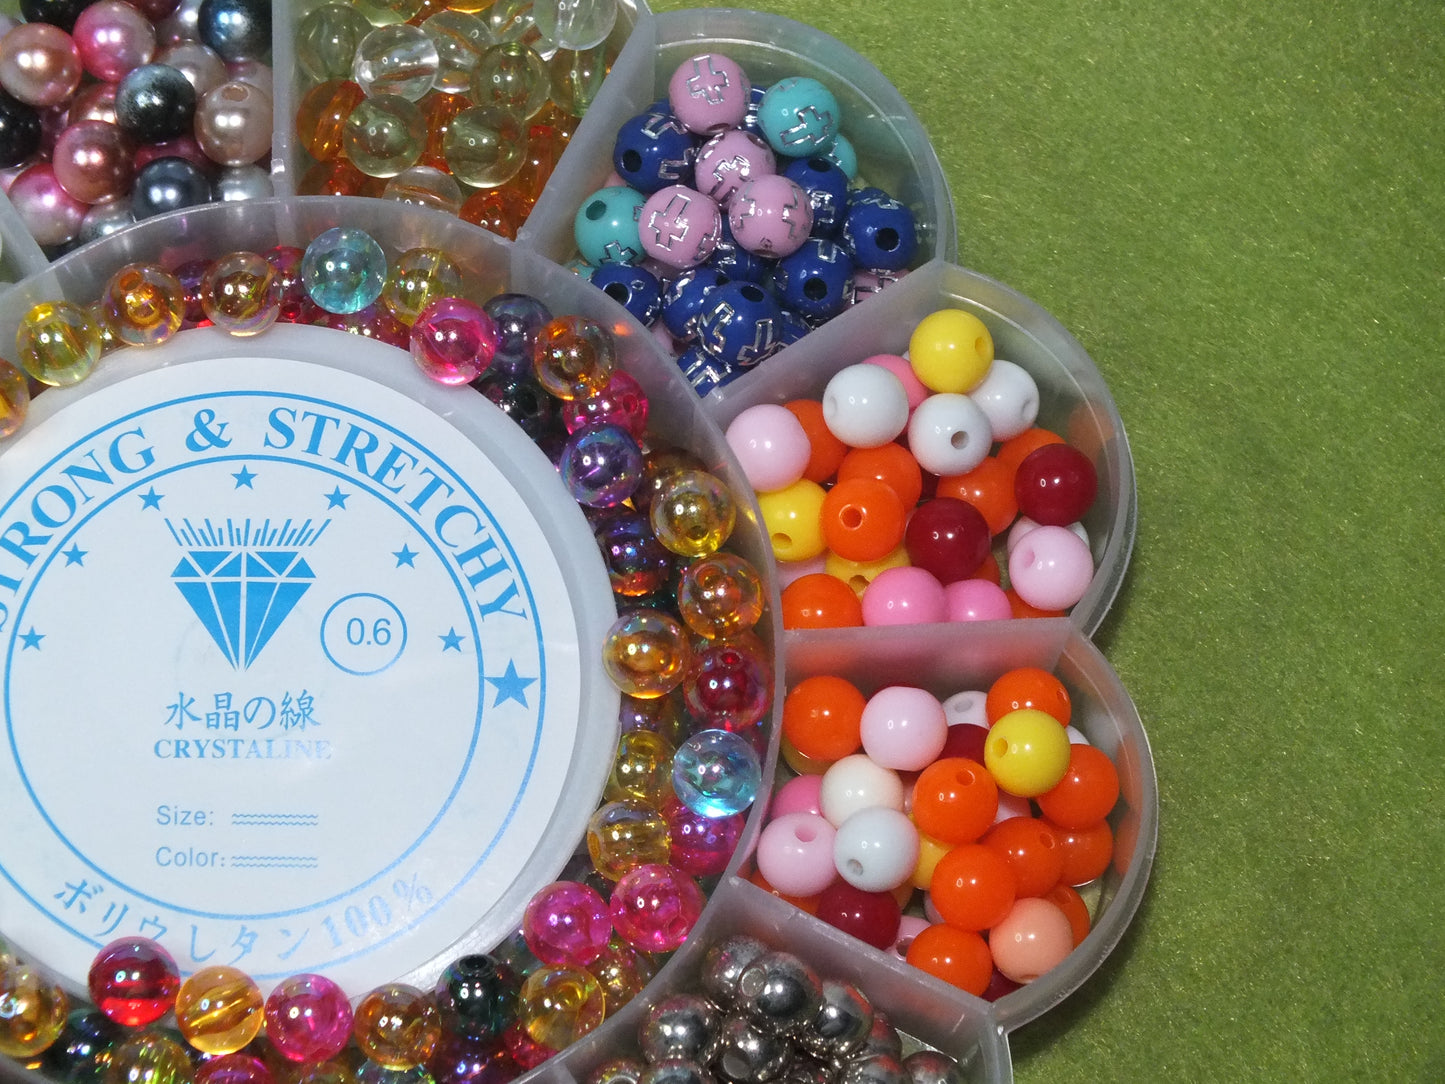 Box of 8mm beads - 460pcs mix, with a roll of elastic